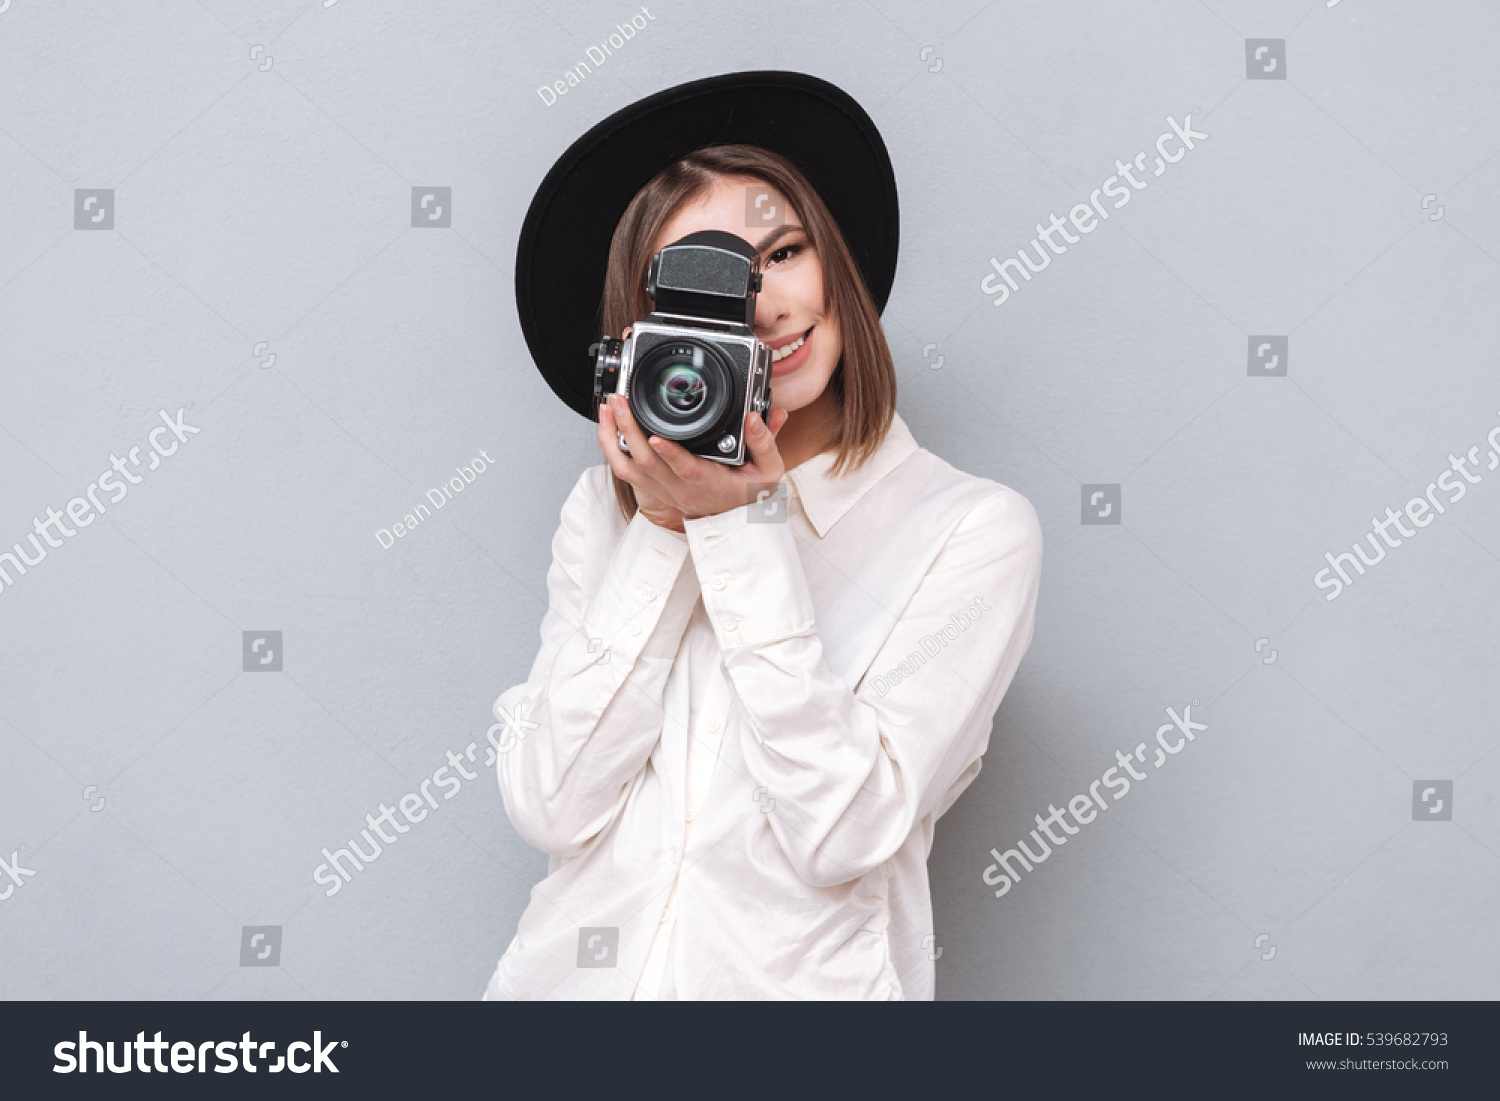 Portrait of a young smiling woman filming with retro camera isolated on the gray background #539682793